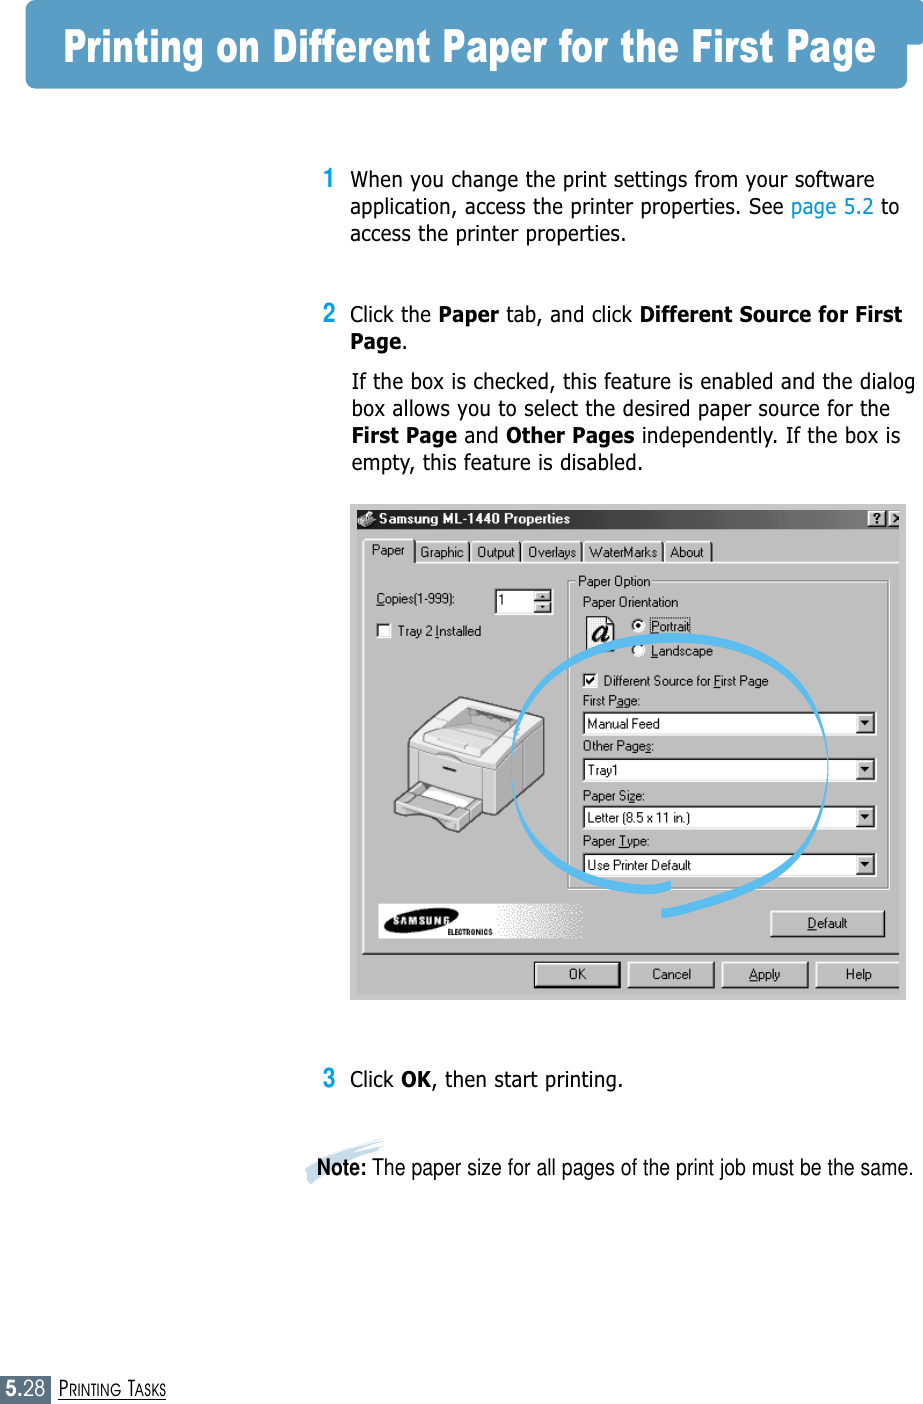 5.28PRINTING TASKSPrinting on Different Paper for the First Page1When you change the print settings from your softwareapplication, access the printer properties. See page 5.2 toaccess the printer properties.2Click the Paper tab, and click Different Source for FirstPage. If the box is checked, this feature is enabled and the dialogbox allows you to select the desired paper source for theFirst Page and Other Pages independently. If the box isempty, this feature is disabled. 3Click OK, then start printing. Note: The paper size for all pages of the print job must be the same.